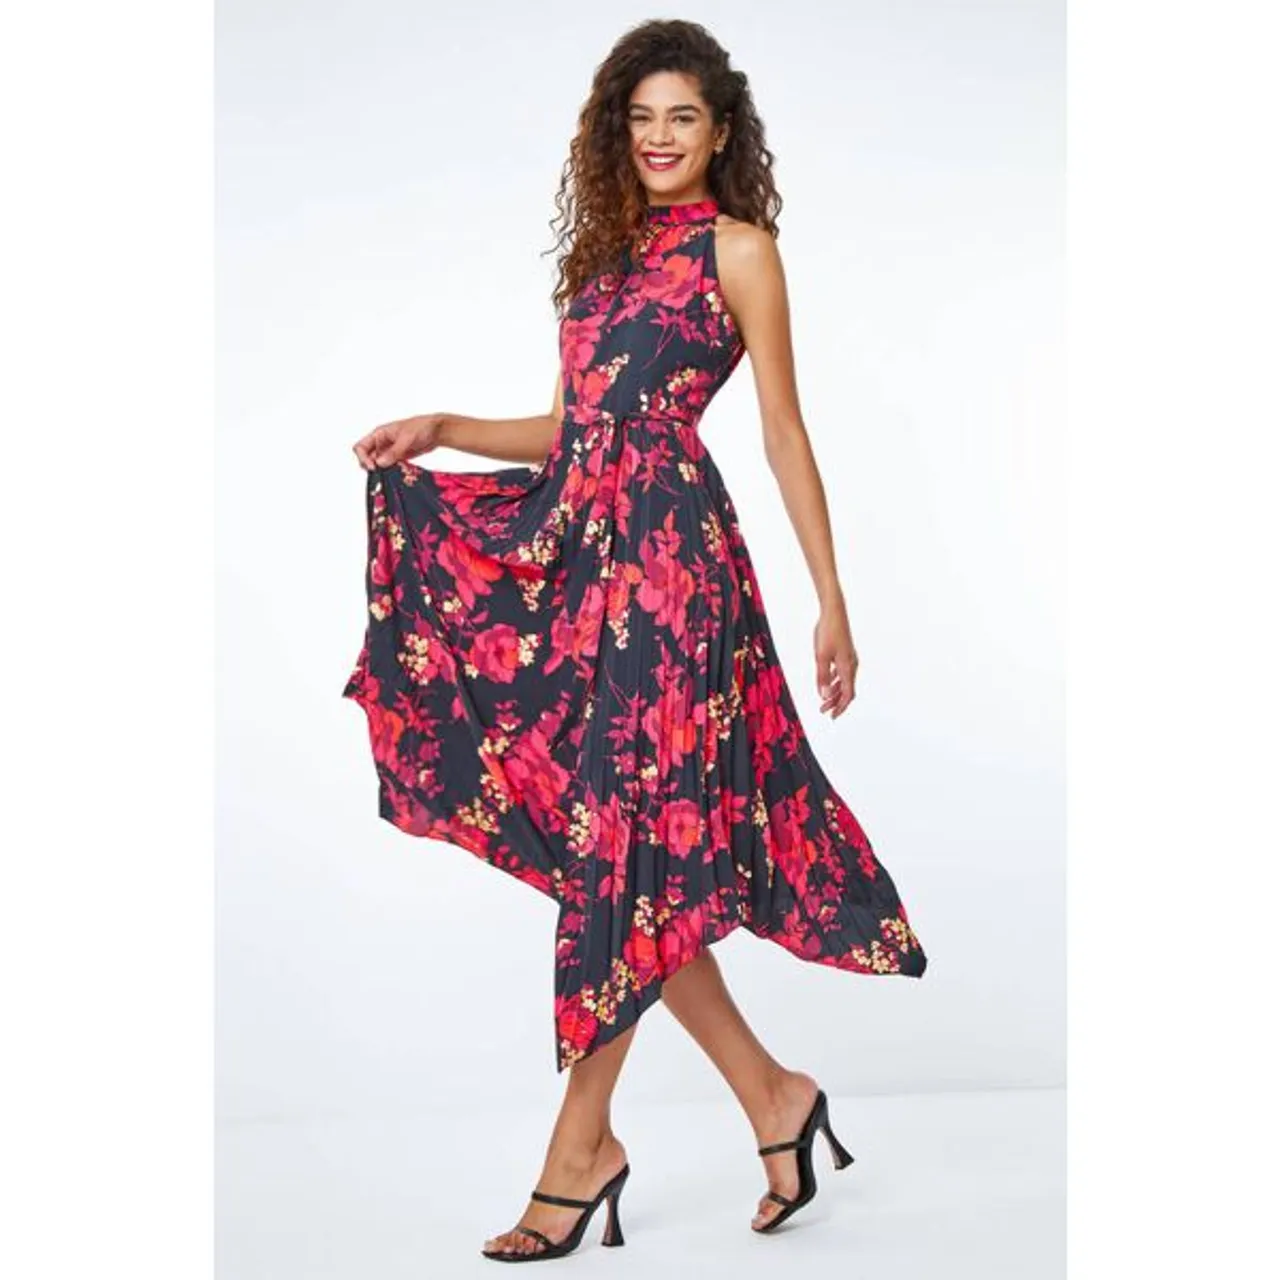 Roman Floral Pleated Halter Neck Midi Dress in Red - Size 20 20 female